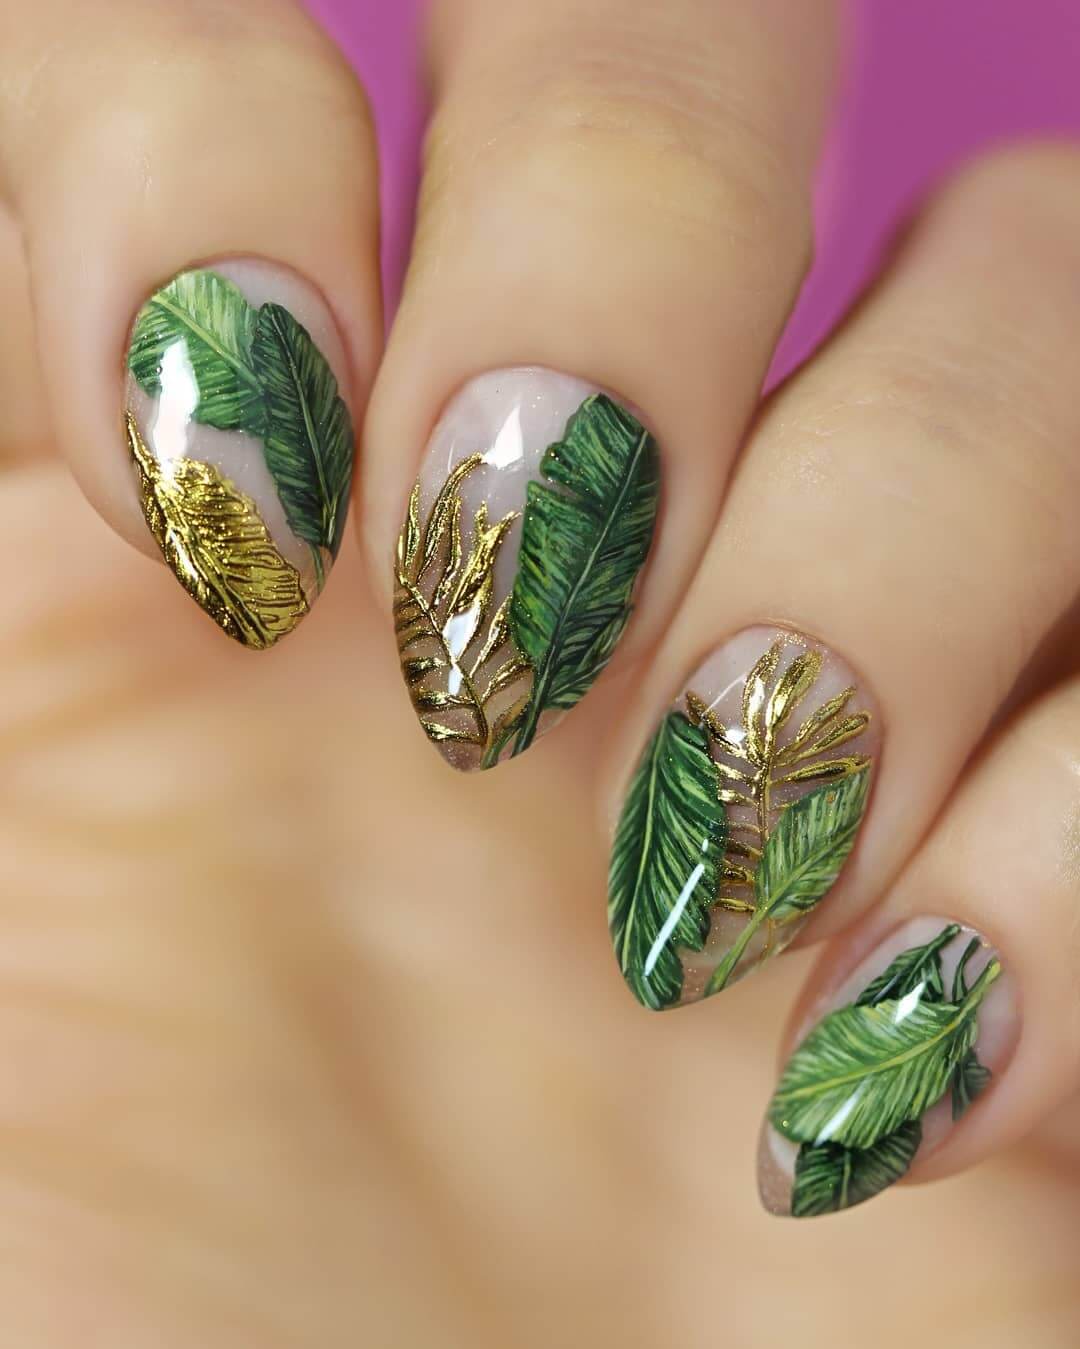 Summer Nail Art Designs Make a whole Tropical Forest on your nails!